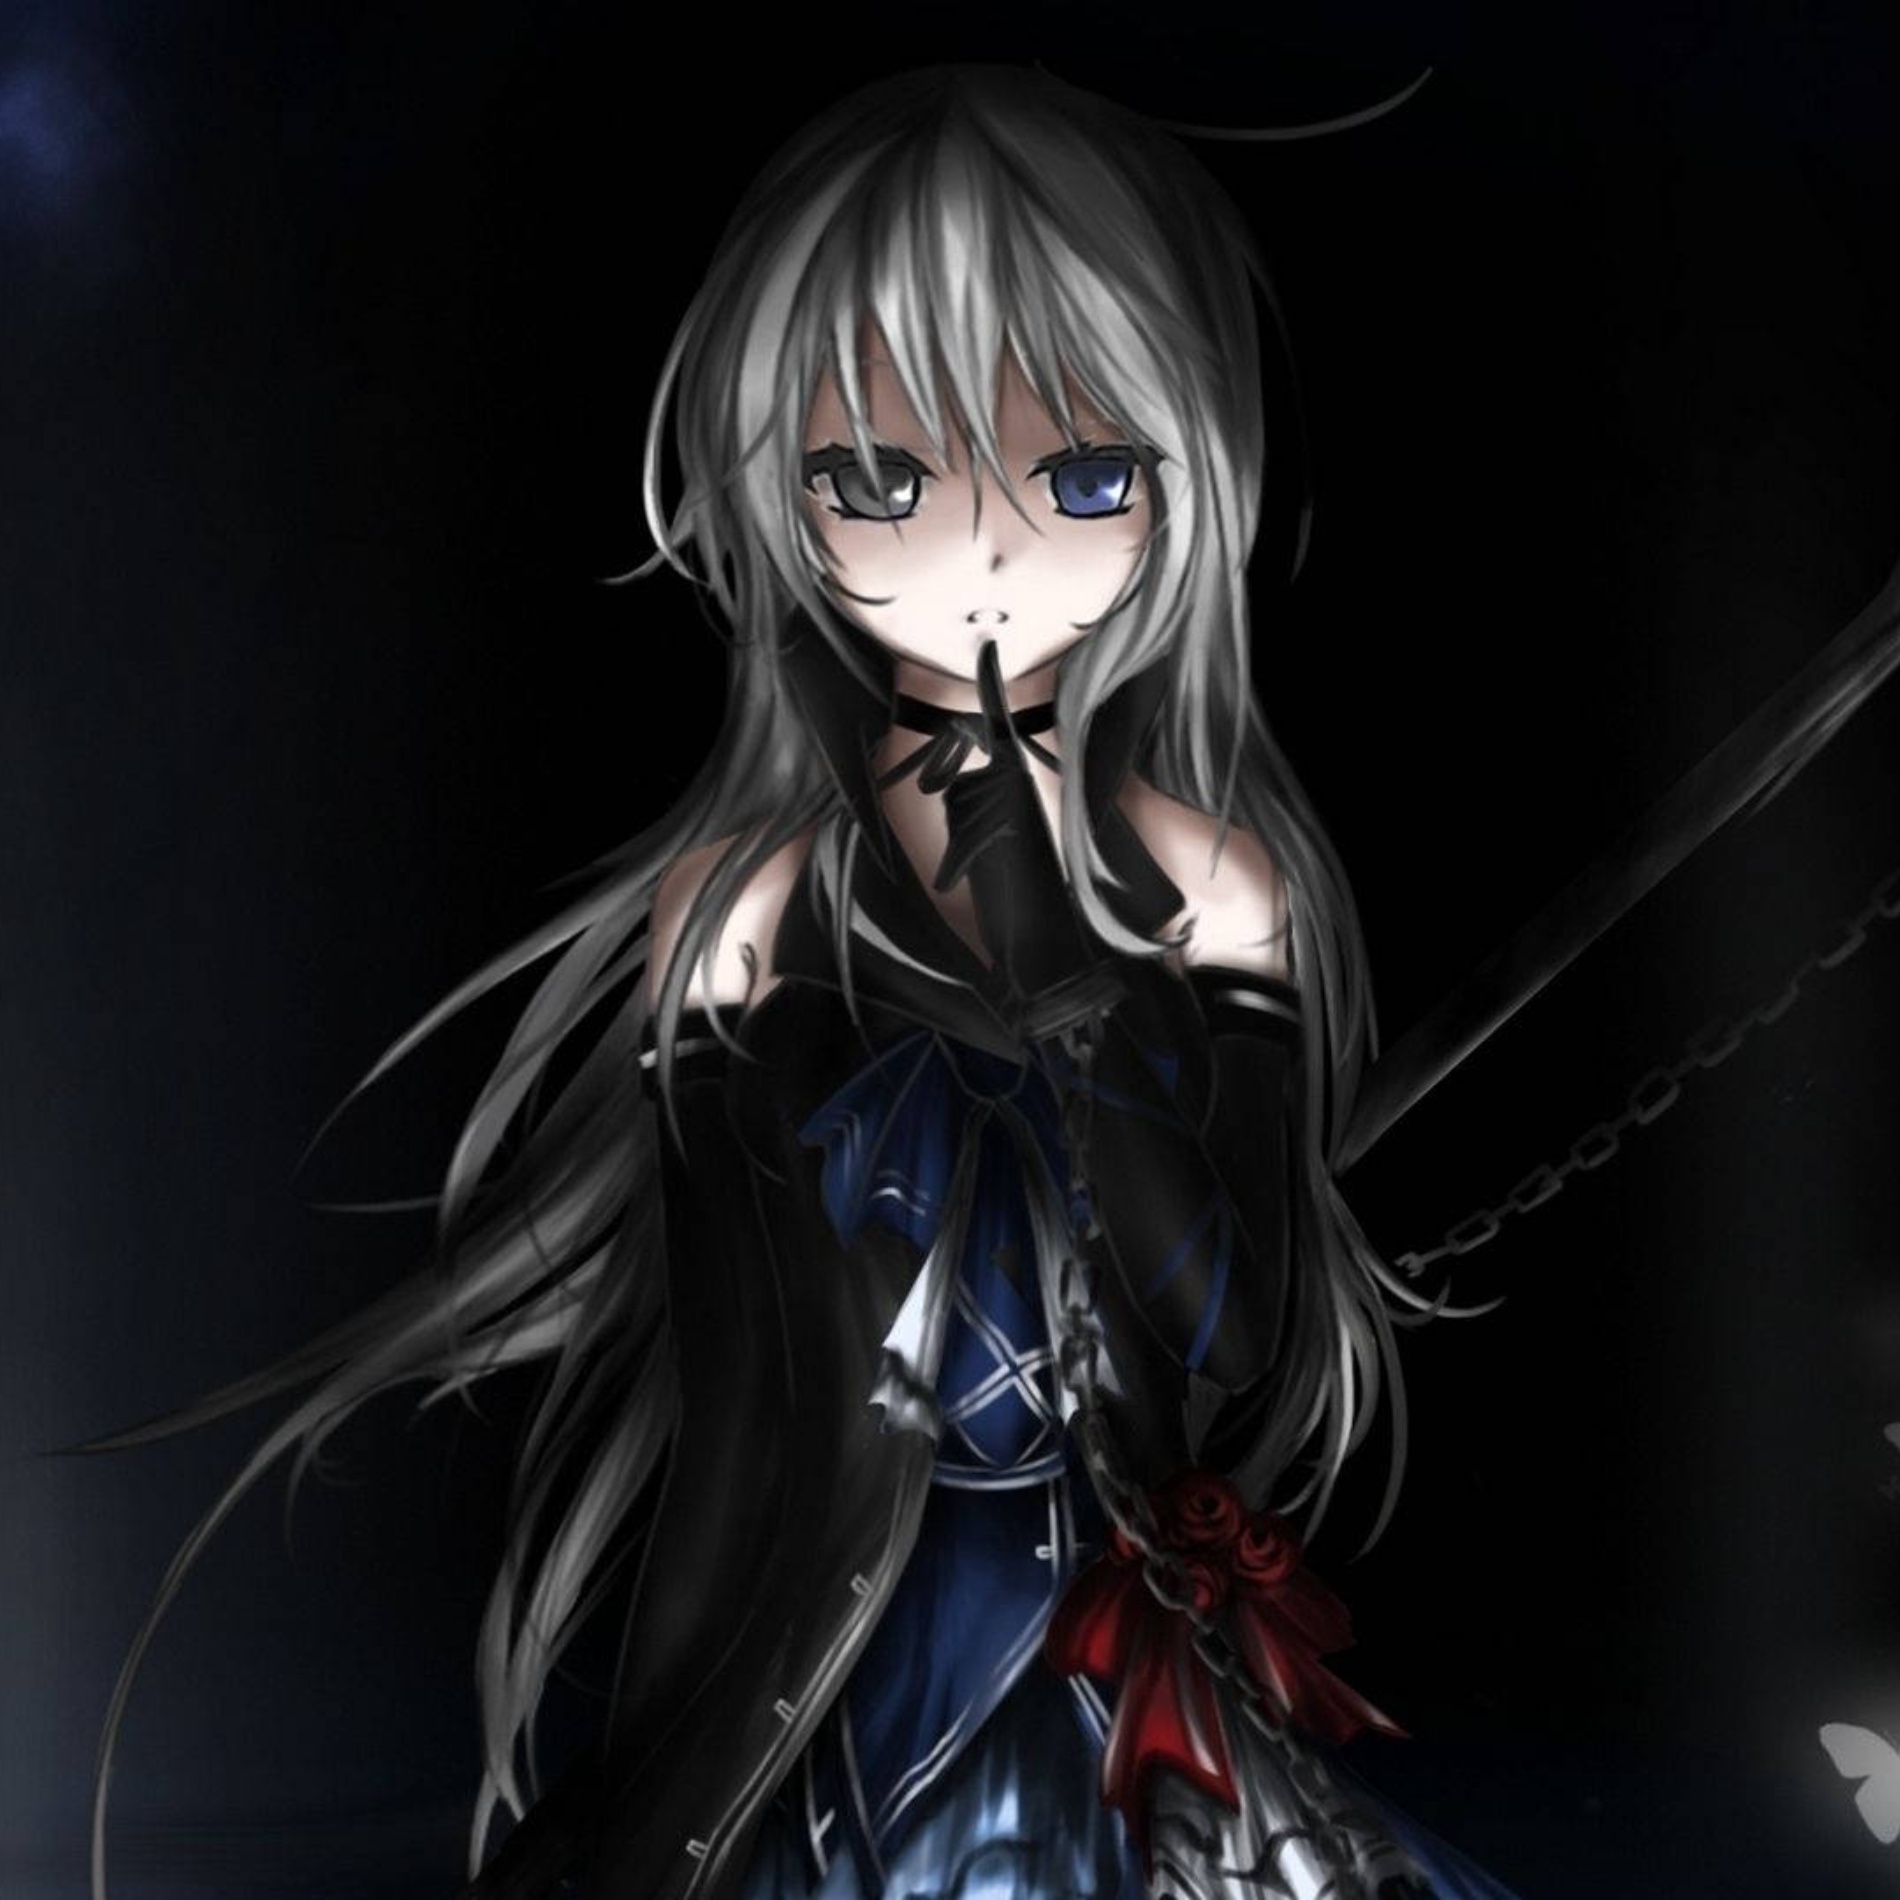 Anime pdp  Profile picture, Anime girl, Gothic anime girl